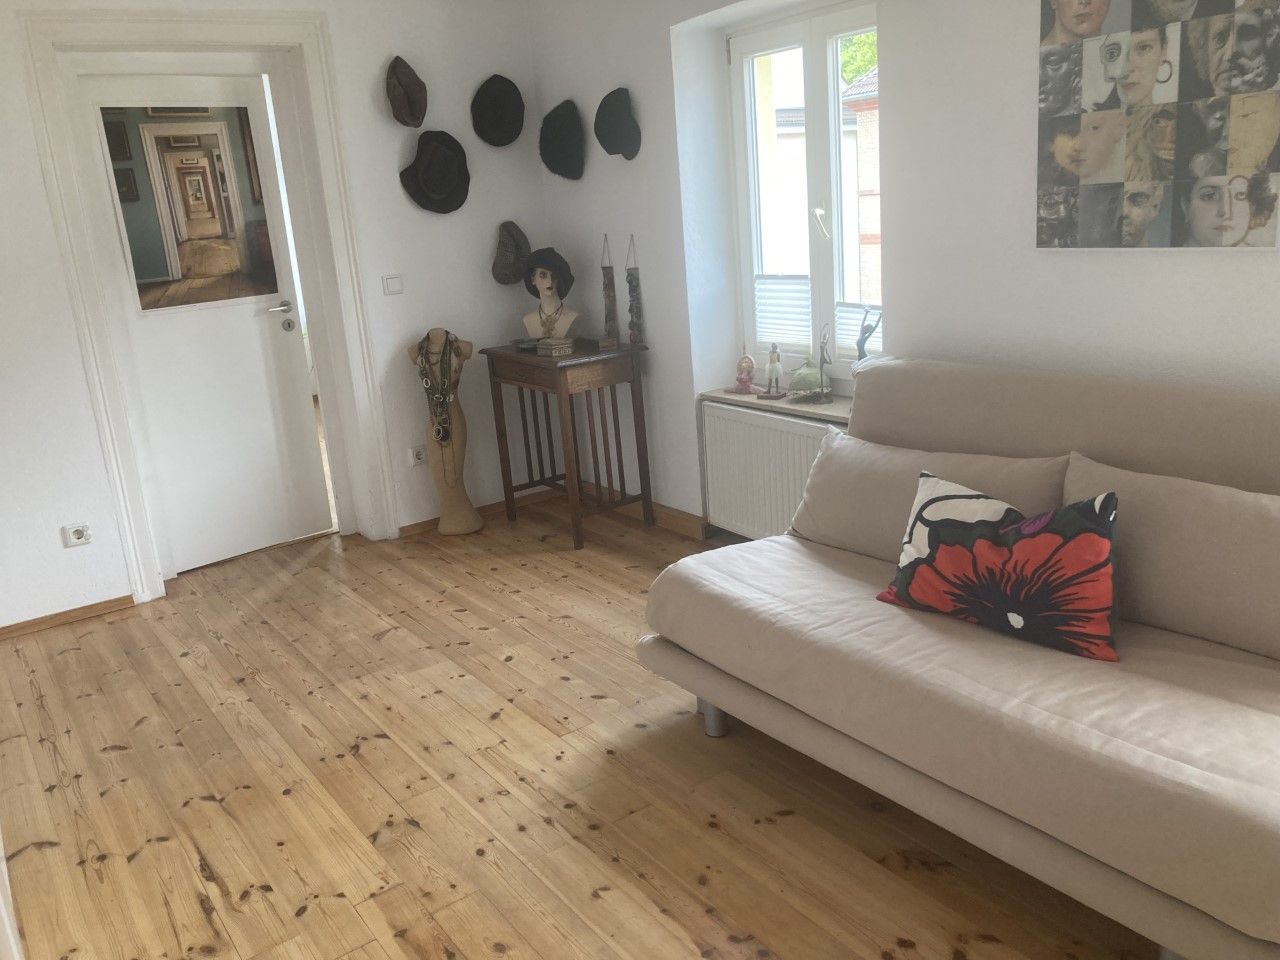 Fully furnished 3 room flat in a renovated old building for 1 year rent, in the heart Frankfurt Bornheim, ideally connected to PT